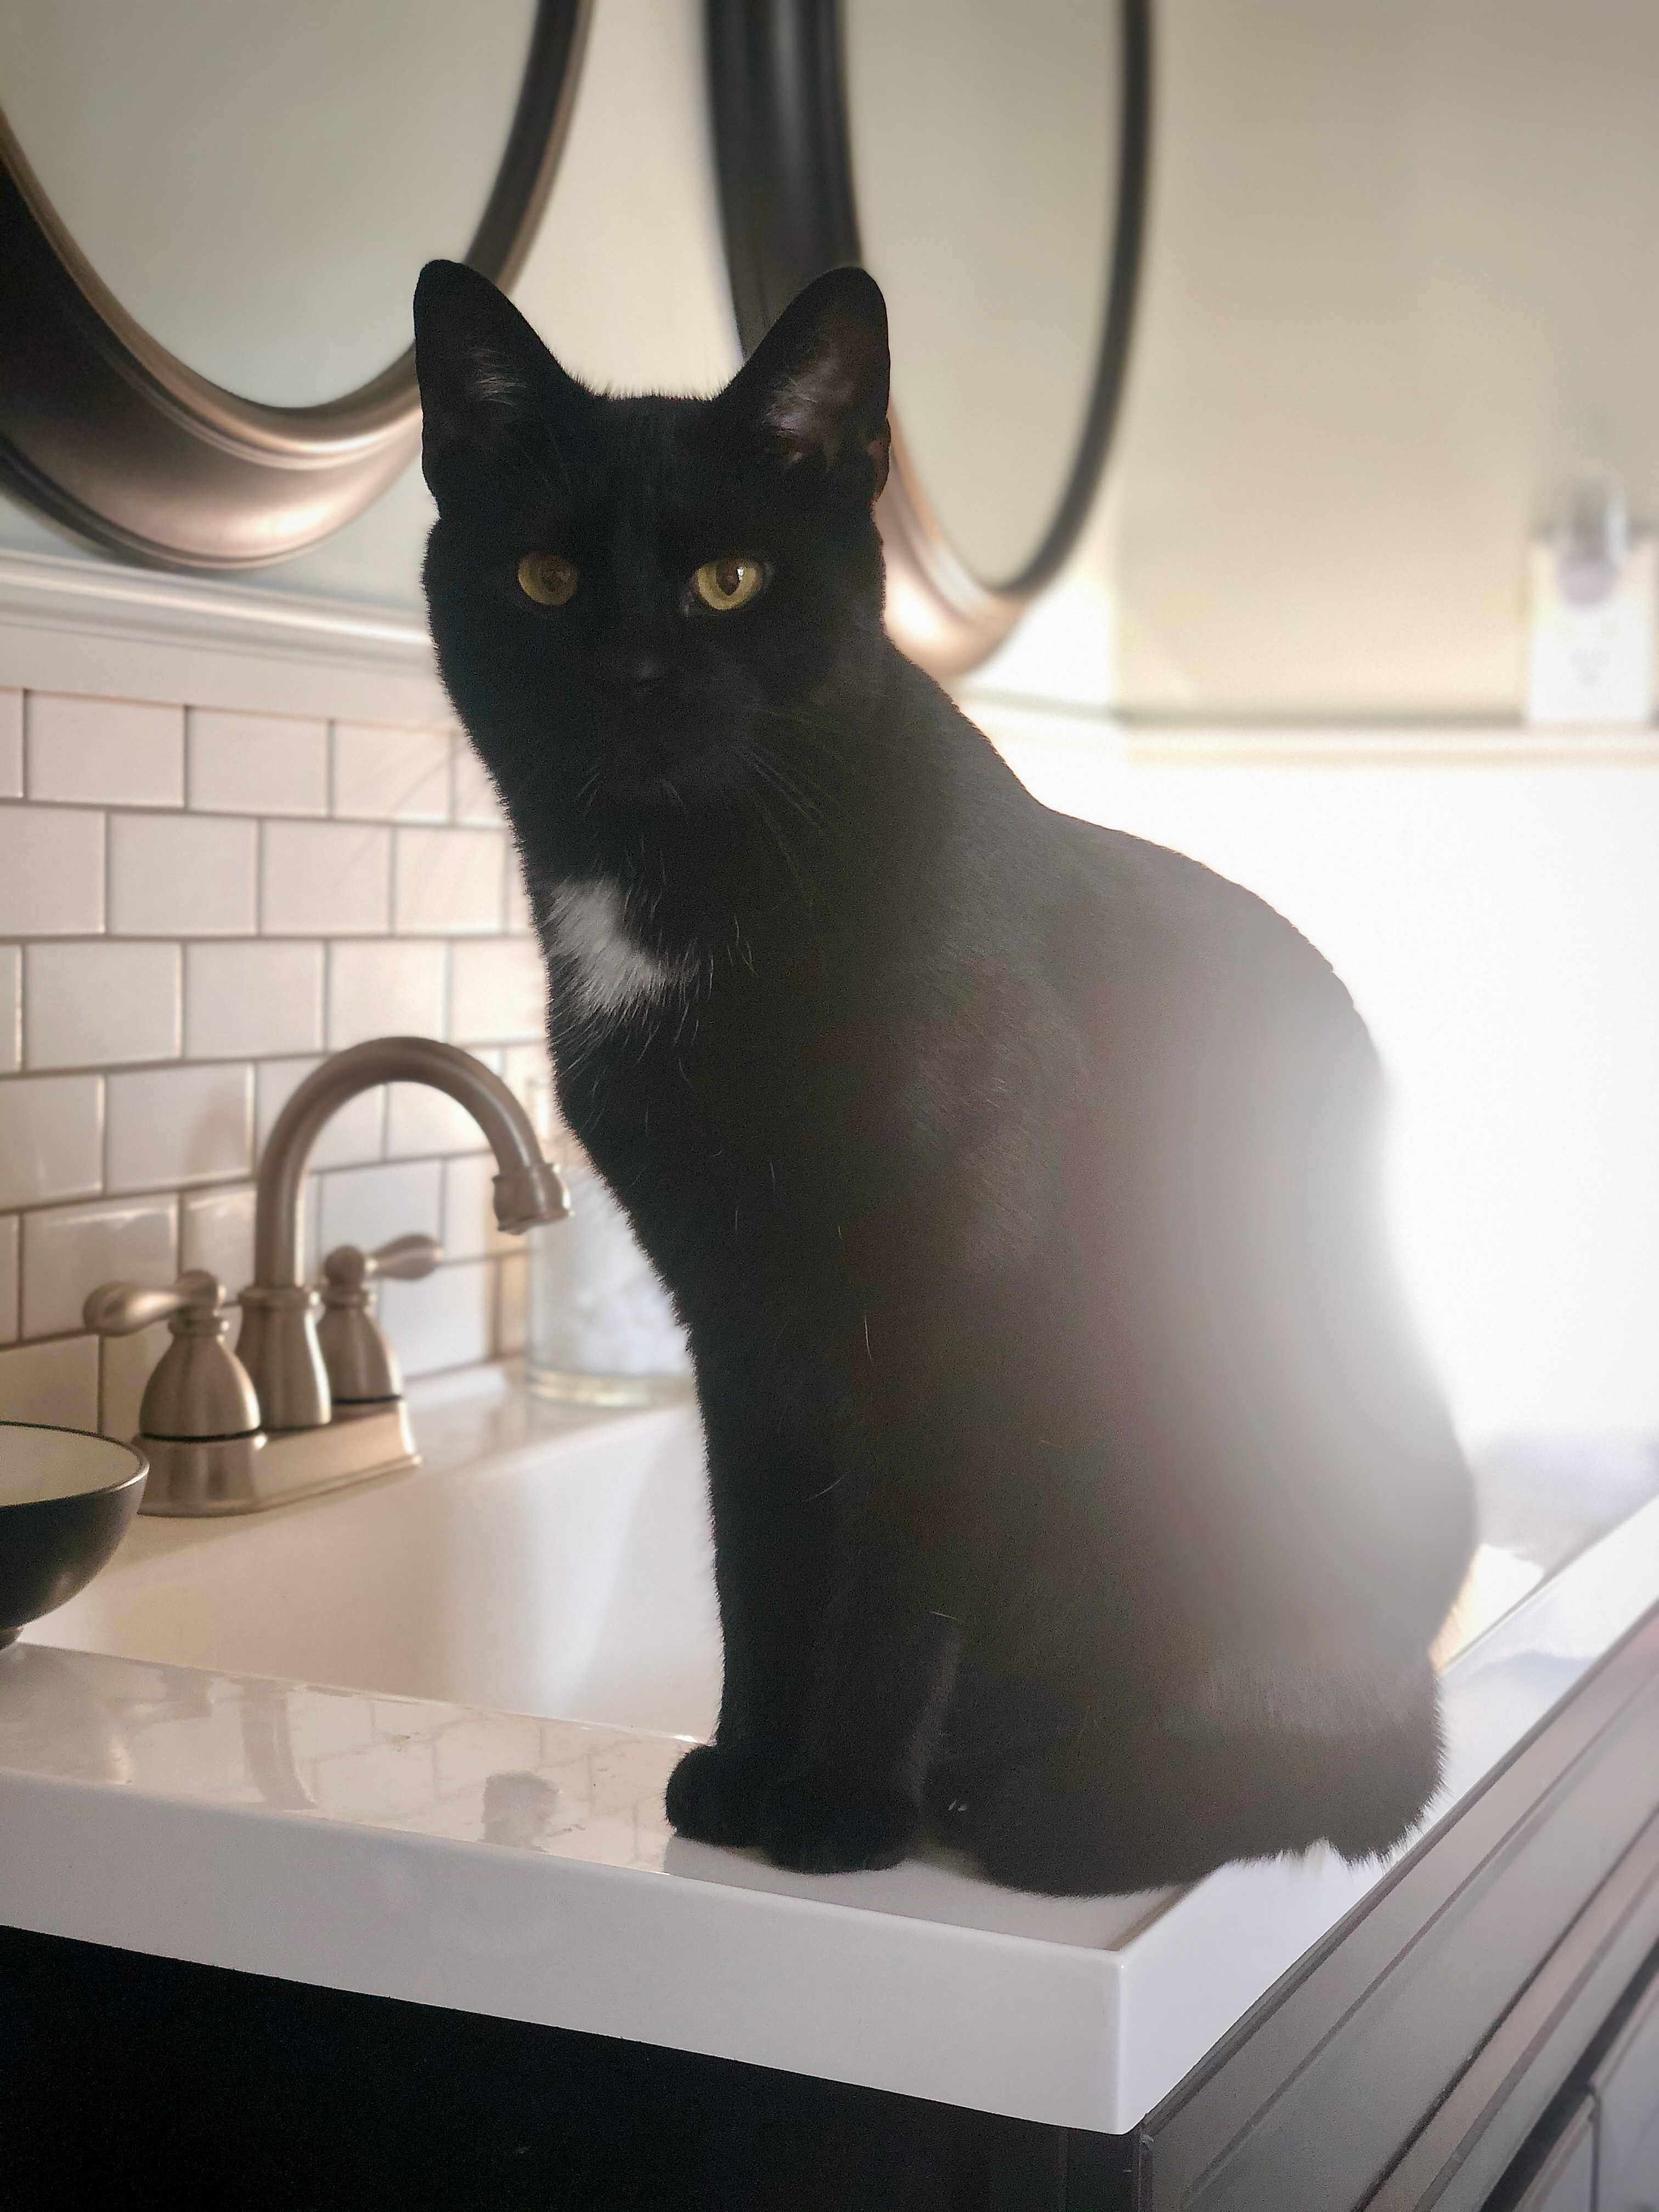 Our cat, Bast, sitting on a sink